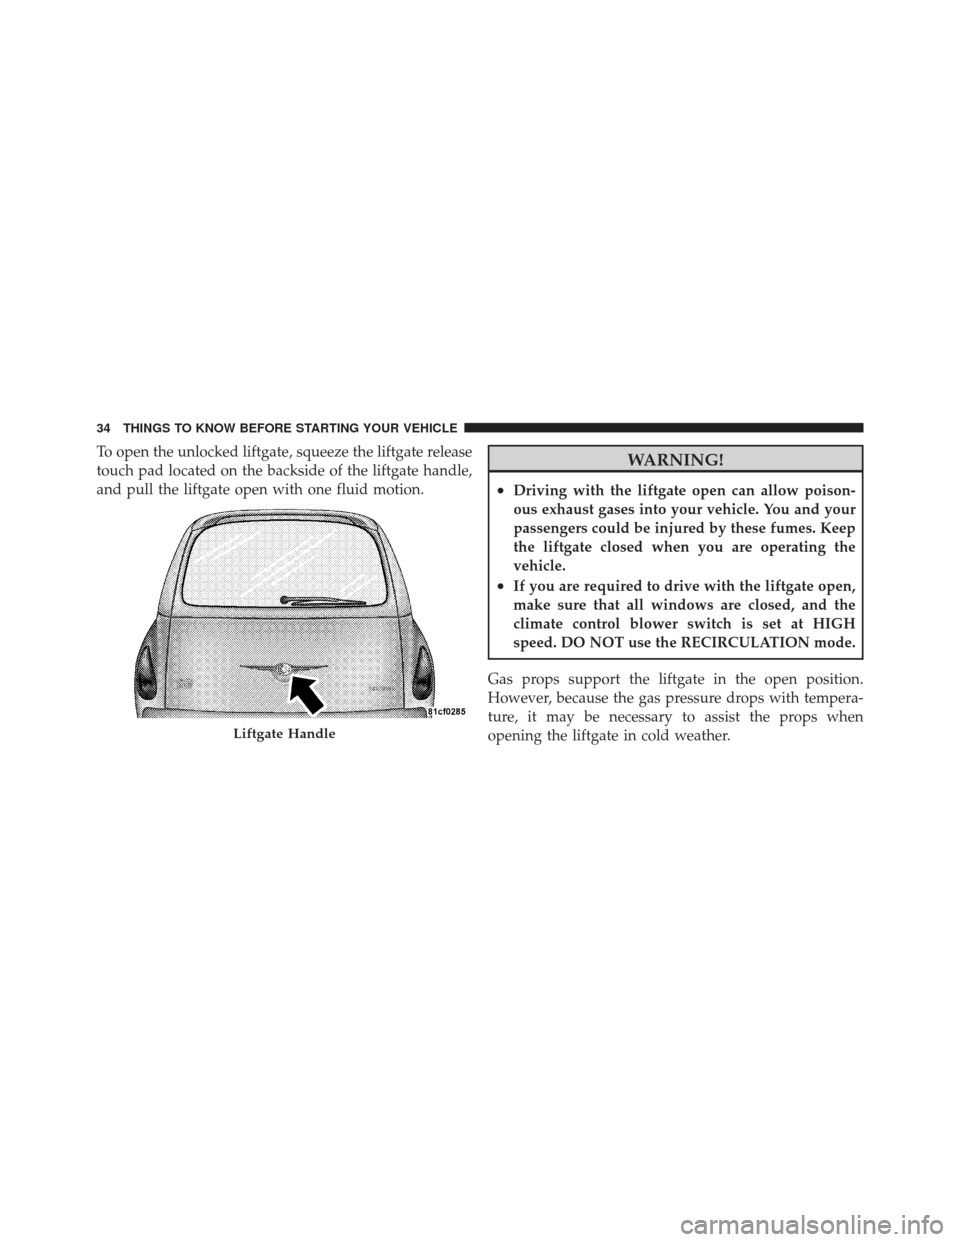 CHRYSLER PT CRUISER 2009 1.G Owners Guide To open the unlocked liftgate, squeeze the liftgate release
touch pad located on the backside of the liftgate handle,
and pull the liftgate open with one fluid motion.WARNING!
•Driving with the lift